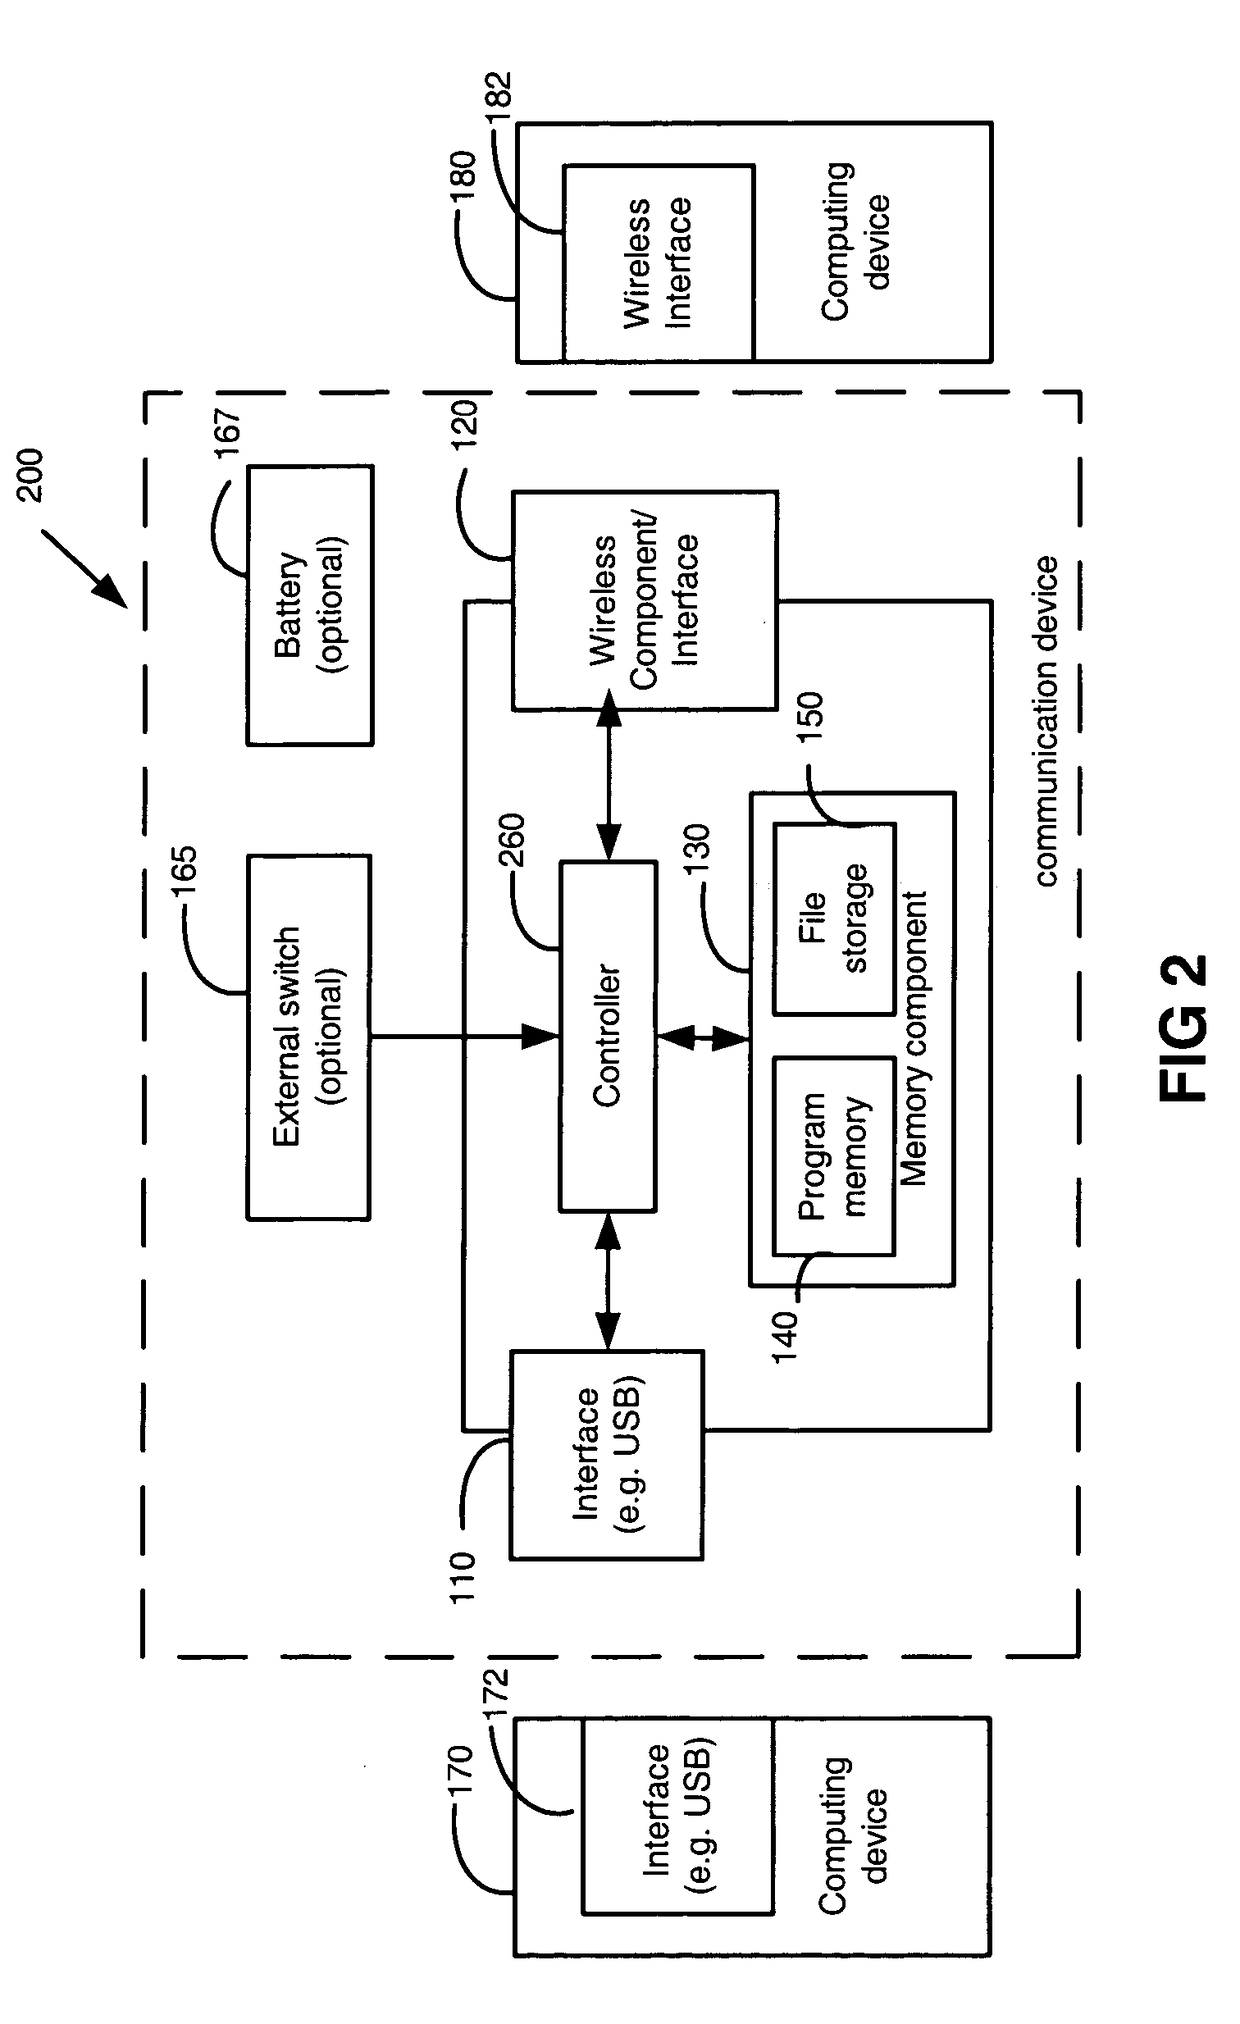 Method and device for wireless communication between computing devices